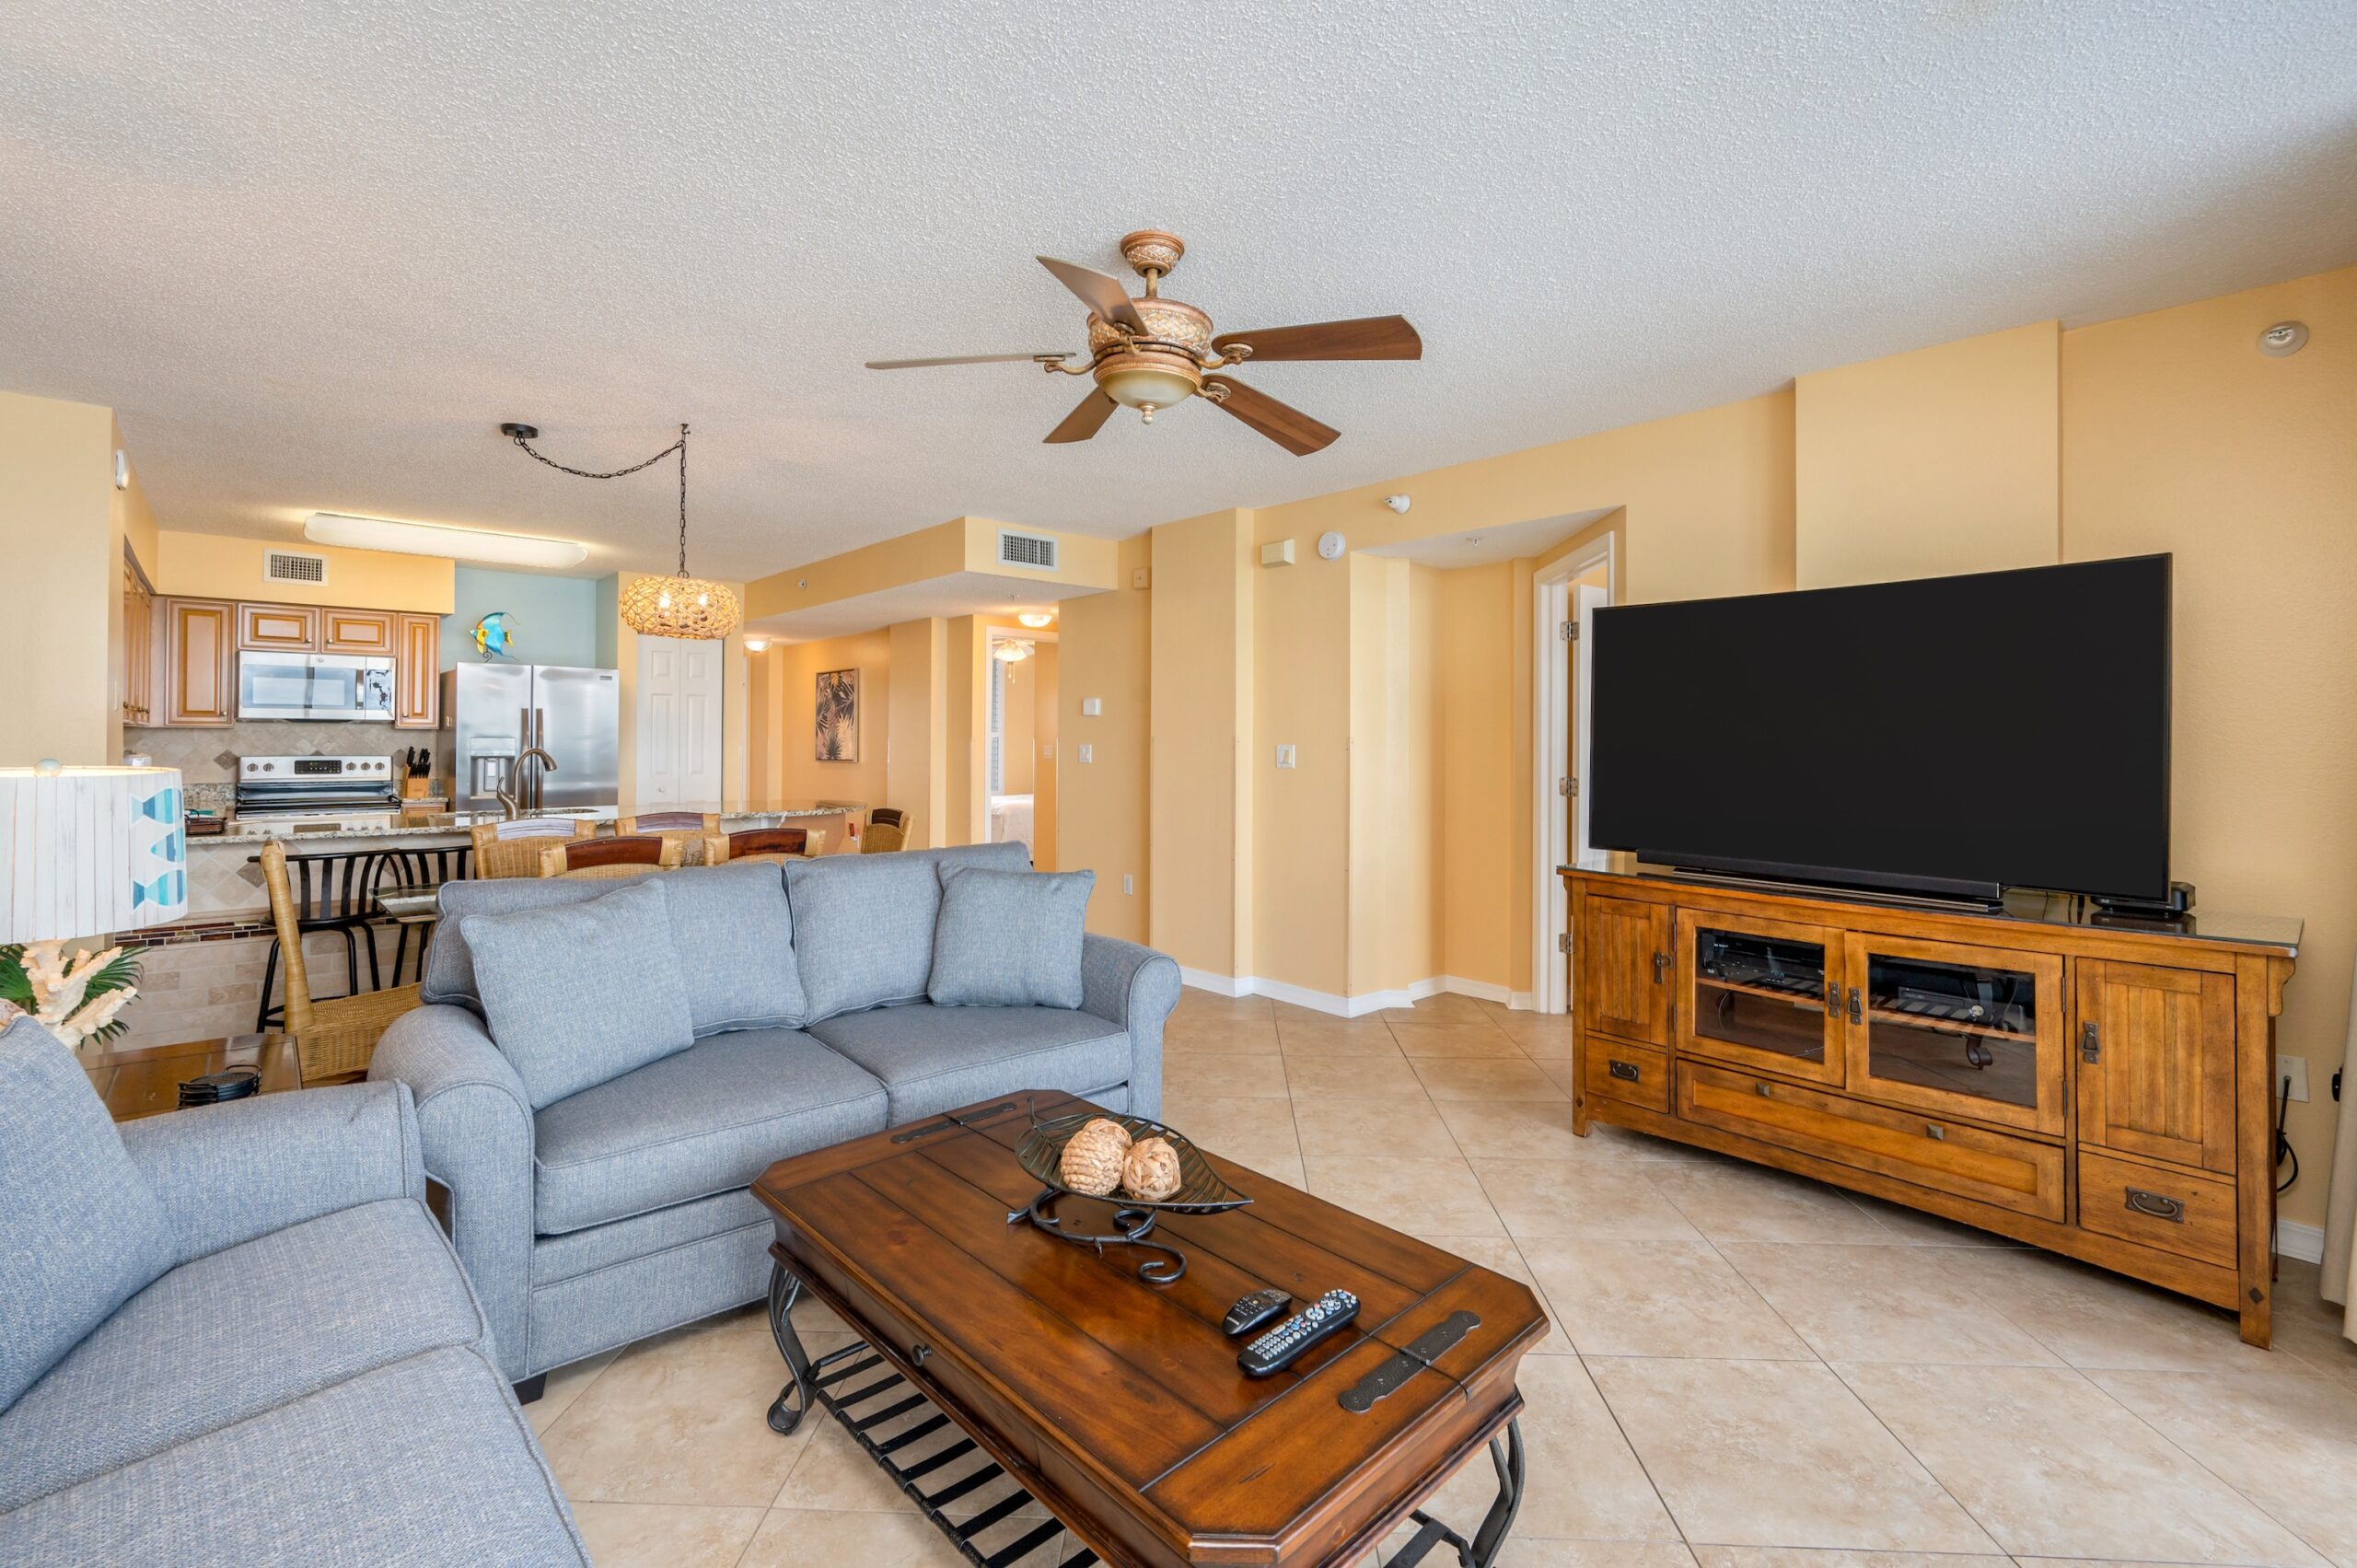 A large TV and console is in the beach condo's living room